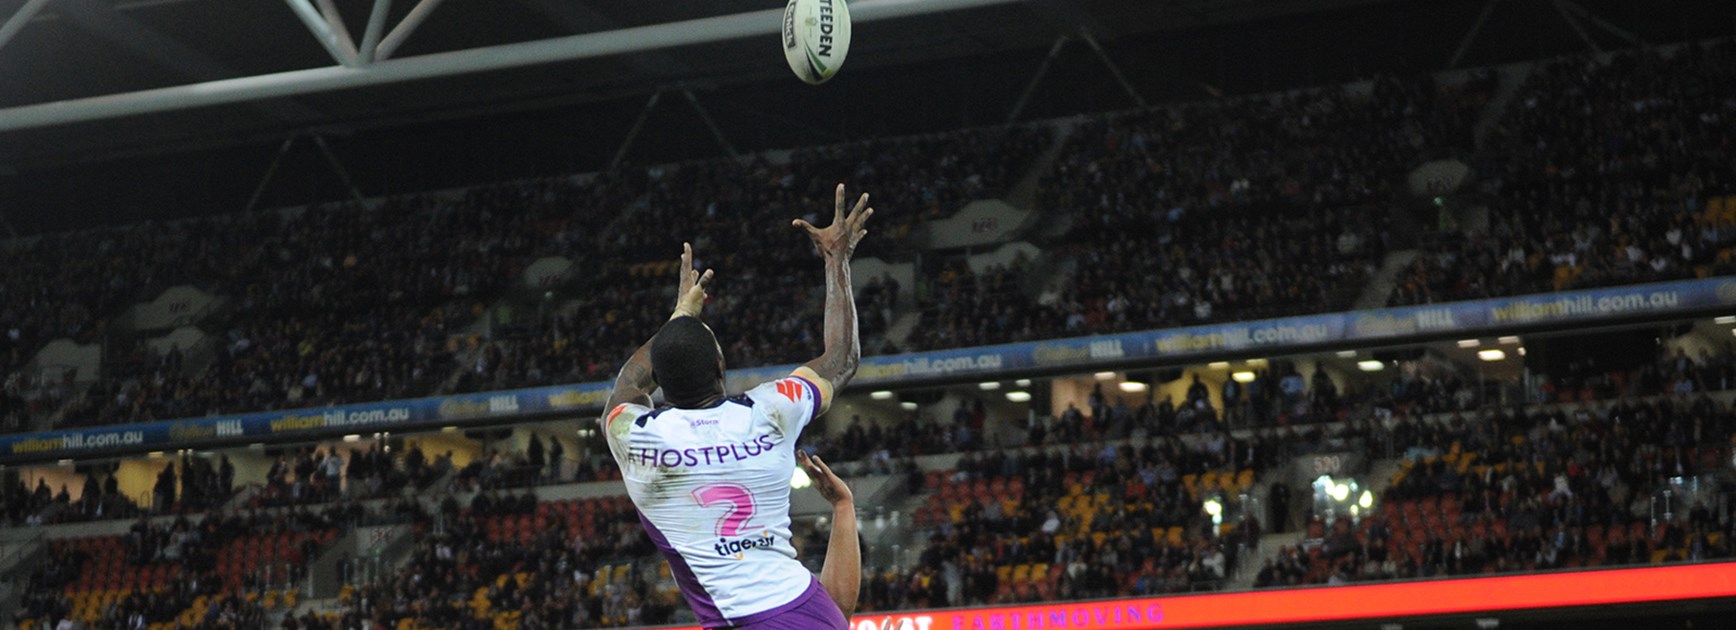 Suliasi Vunivalu soars above the Broncos to score a hat-trick at Suncorp Stadium.